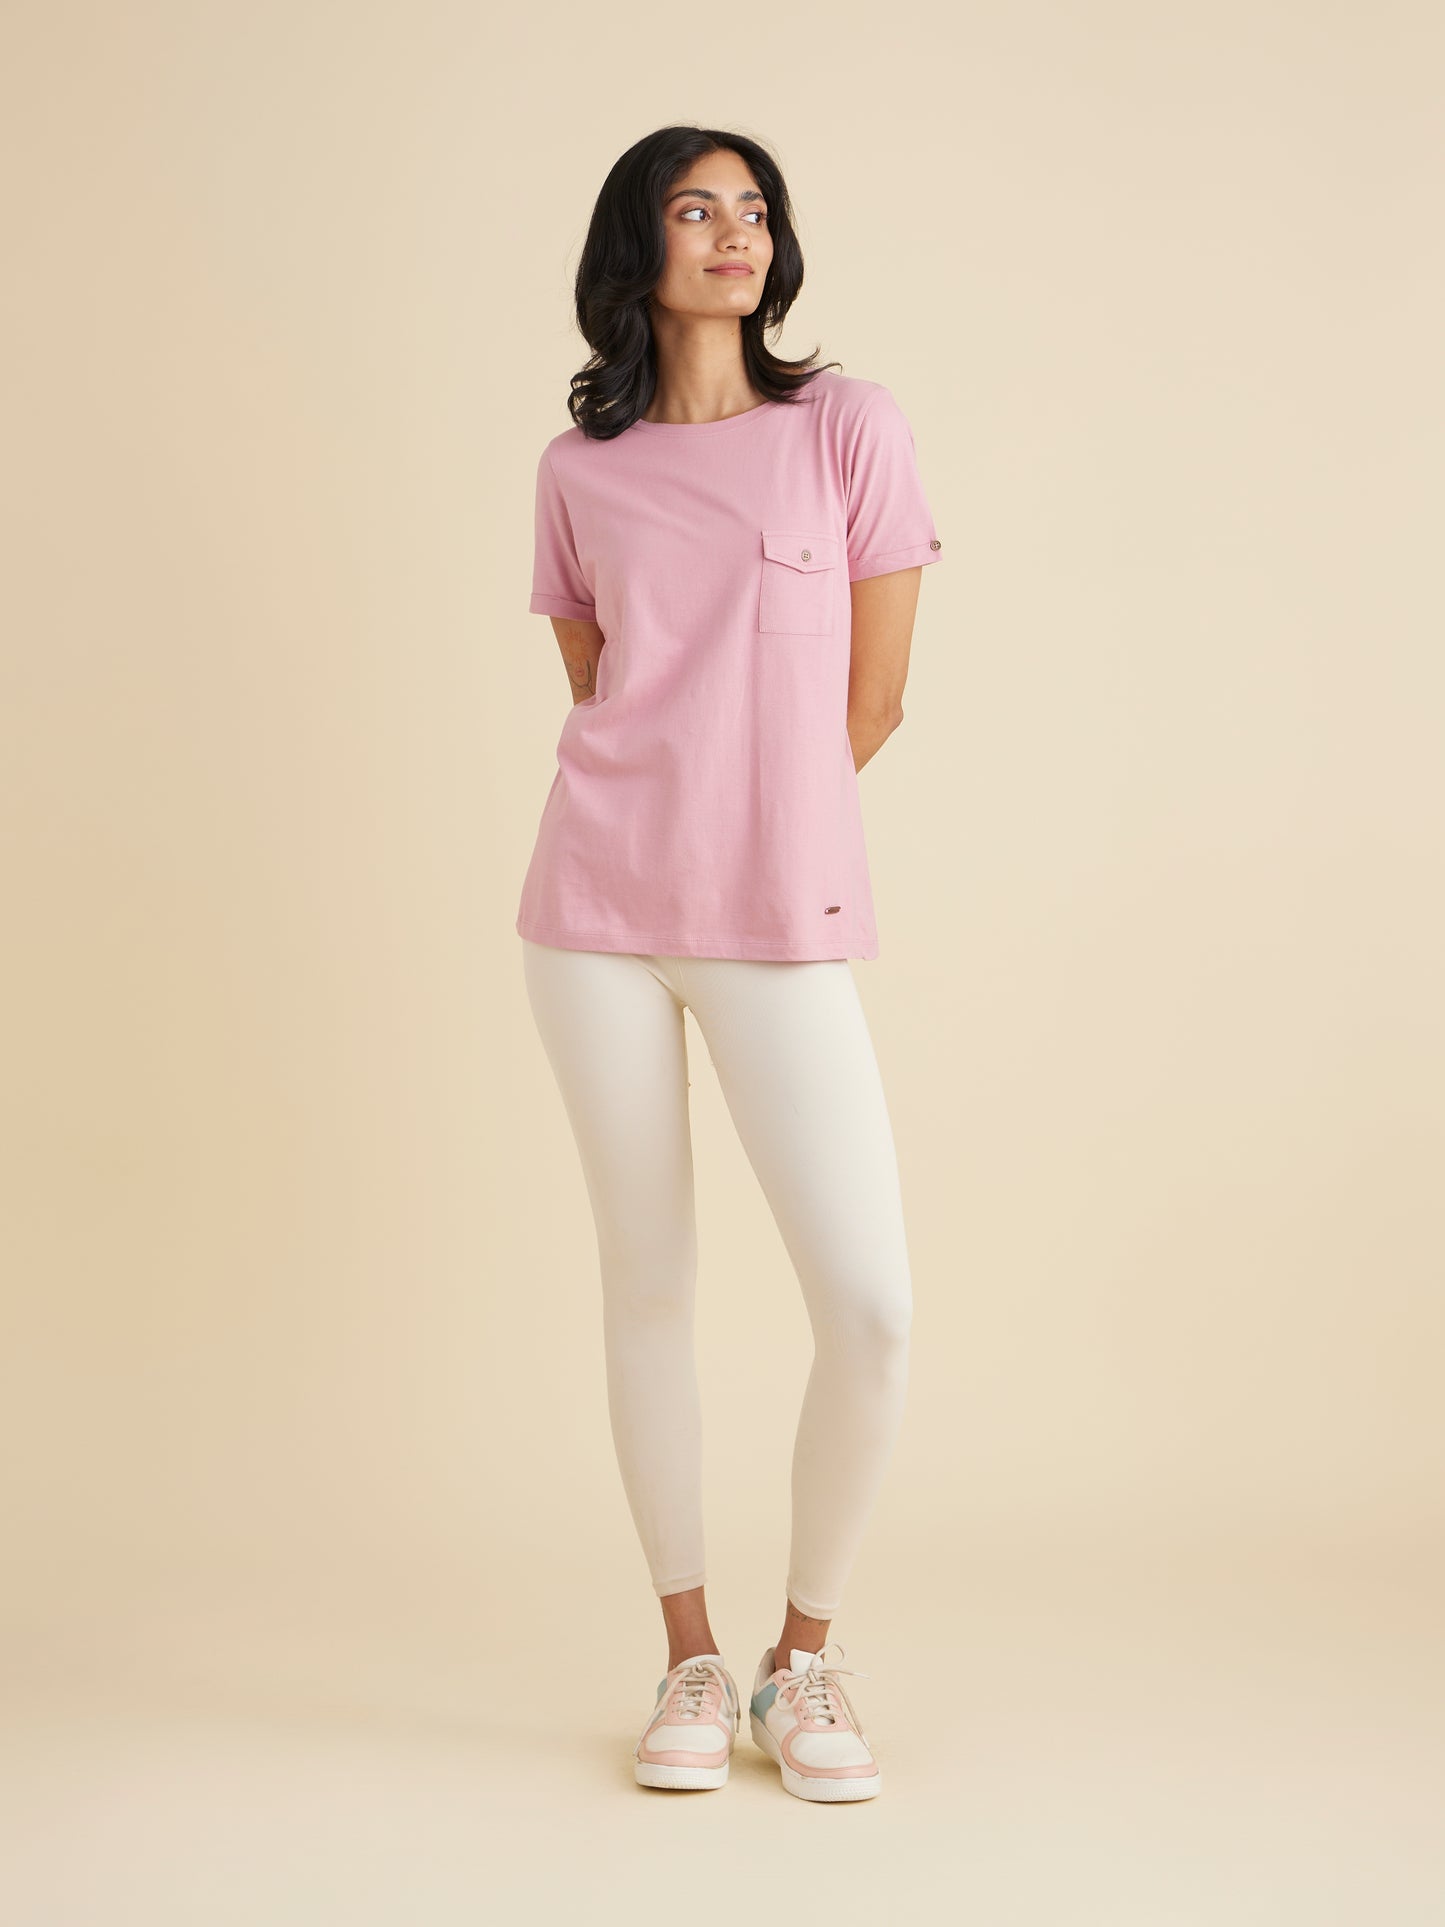 The Acanthus Top Pink